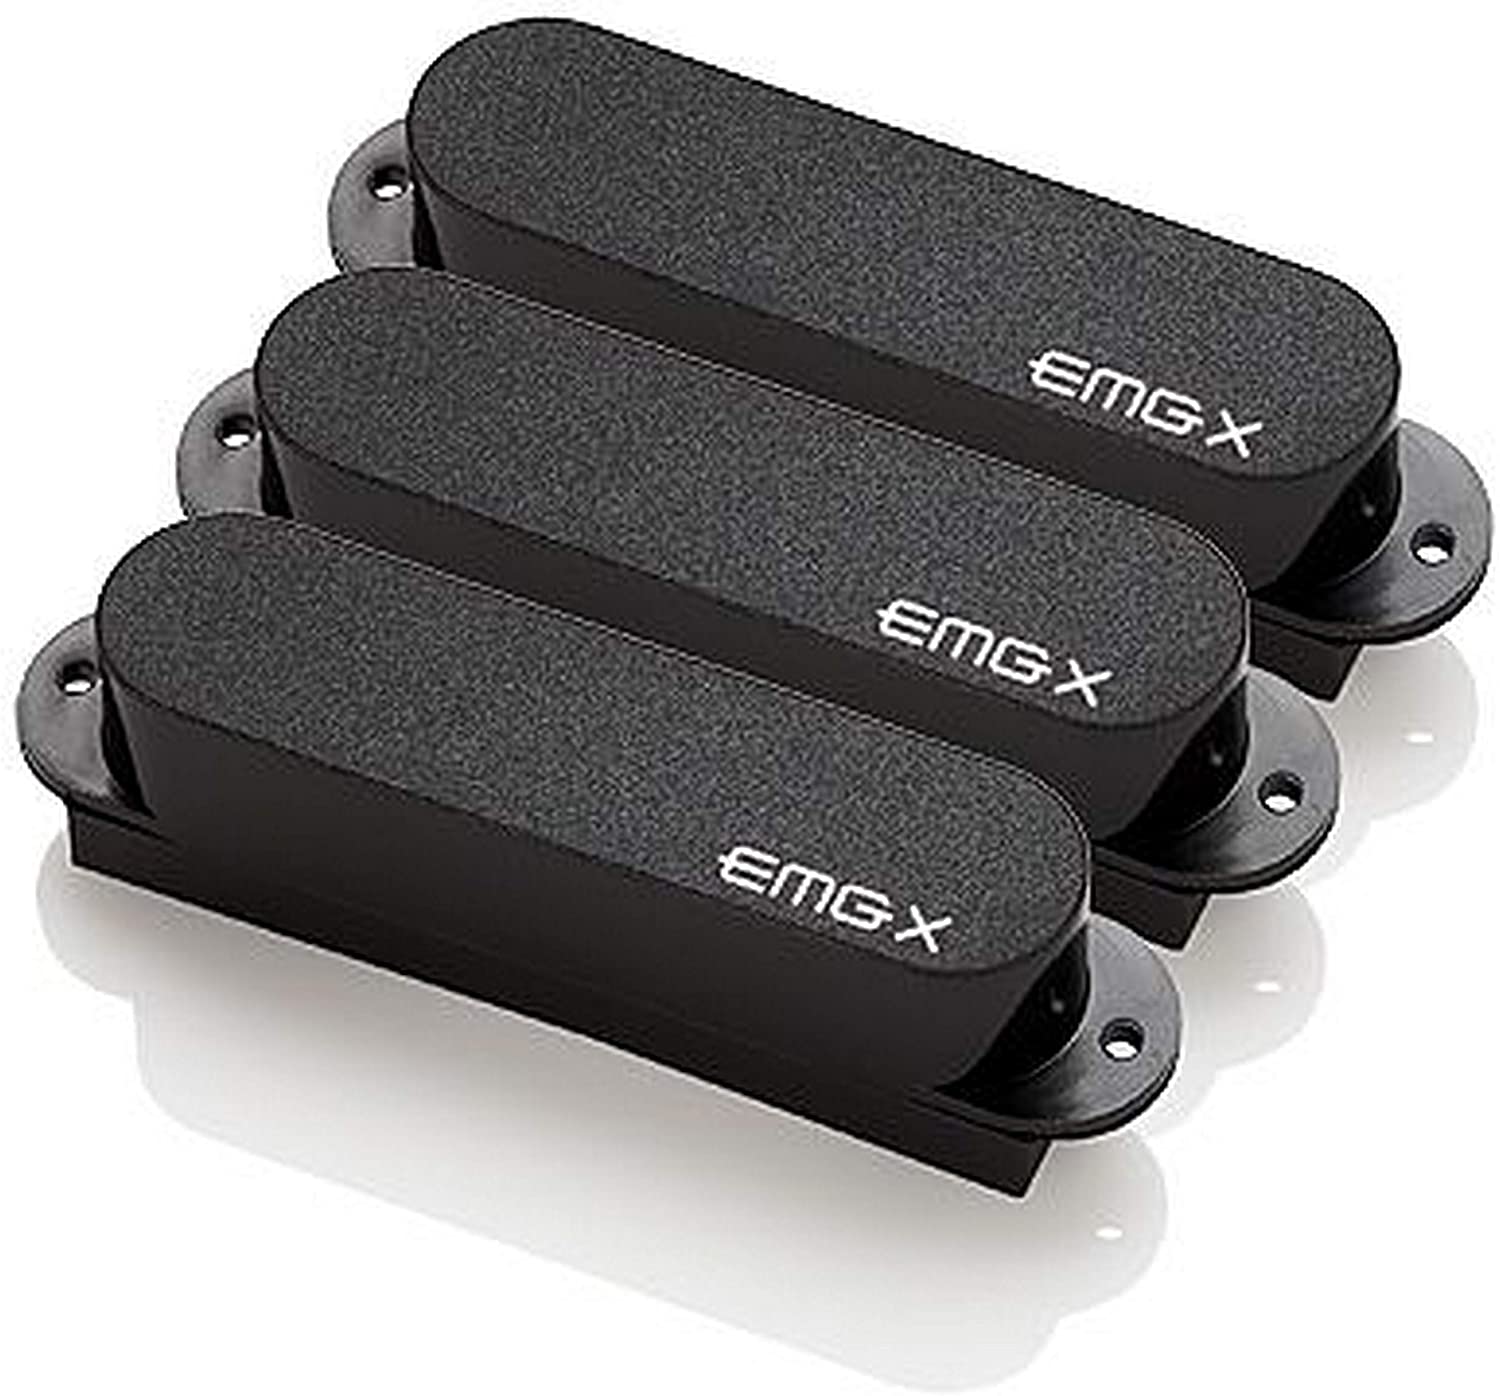 EMG SX Active Single-Coil Guitar Pickup on a white background